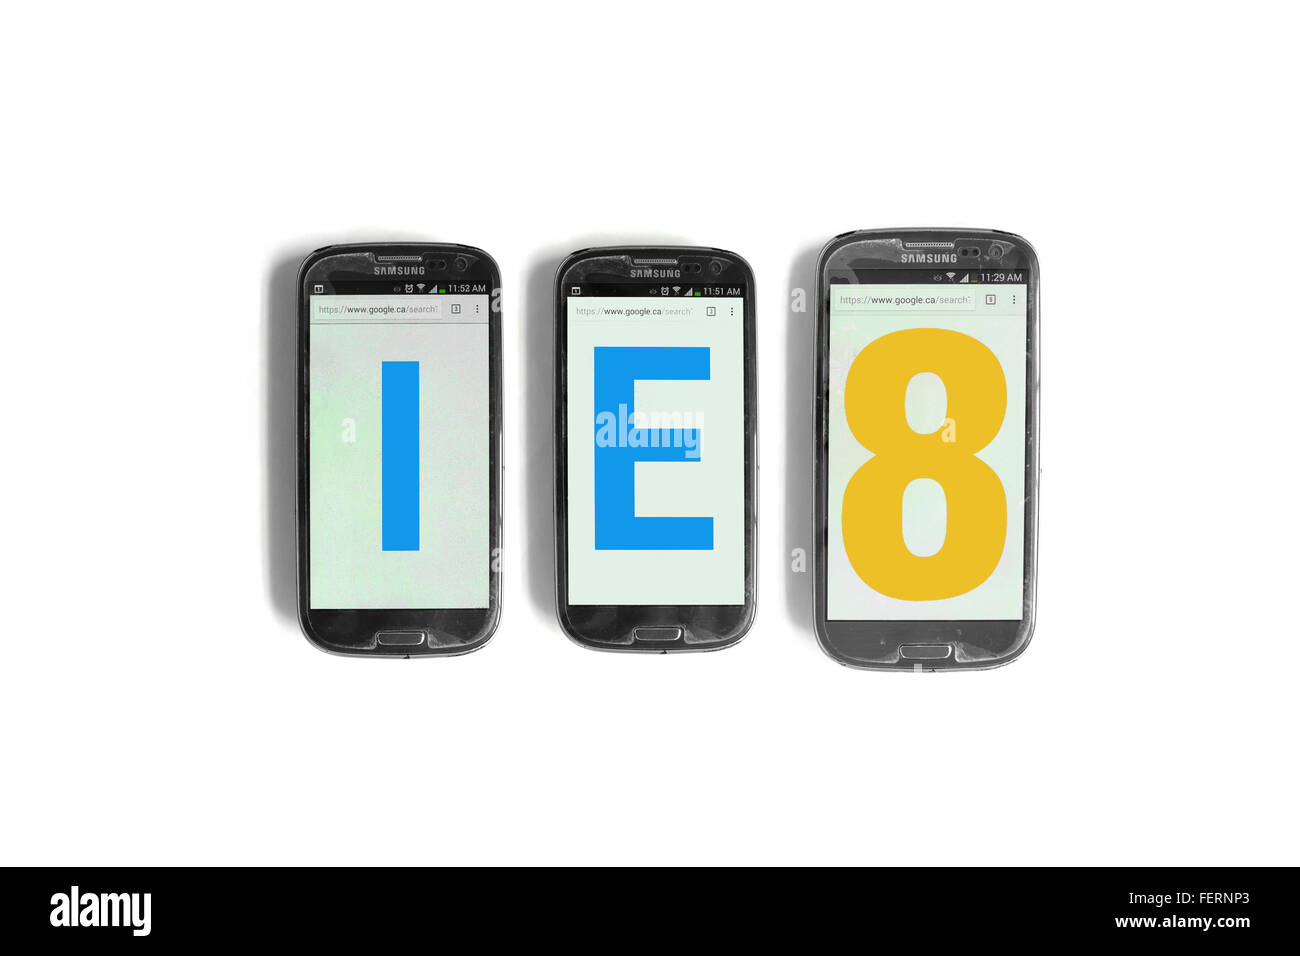 IE8 on the screens of smartphones photographed against a  white background. Stock Photo